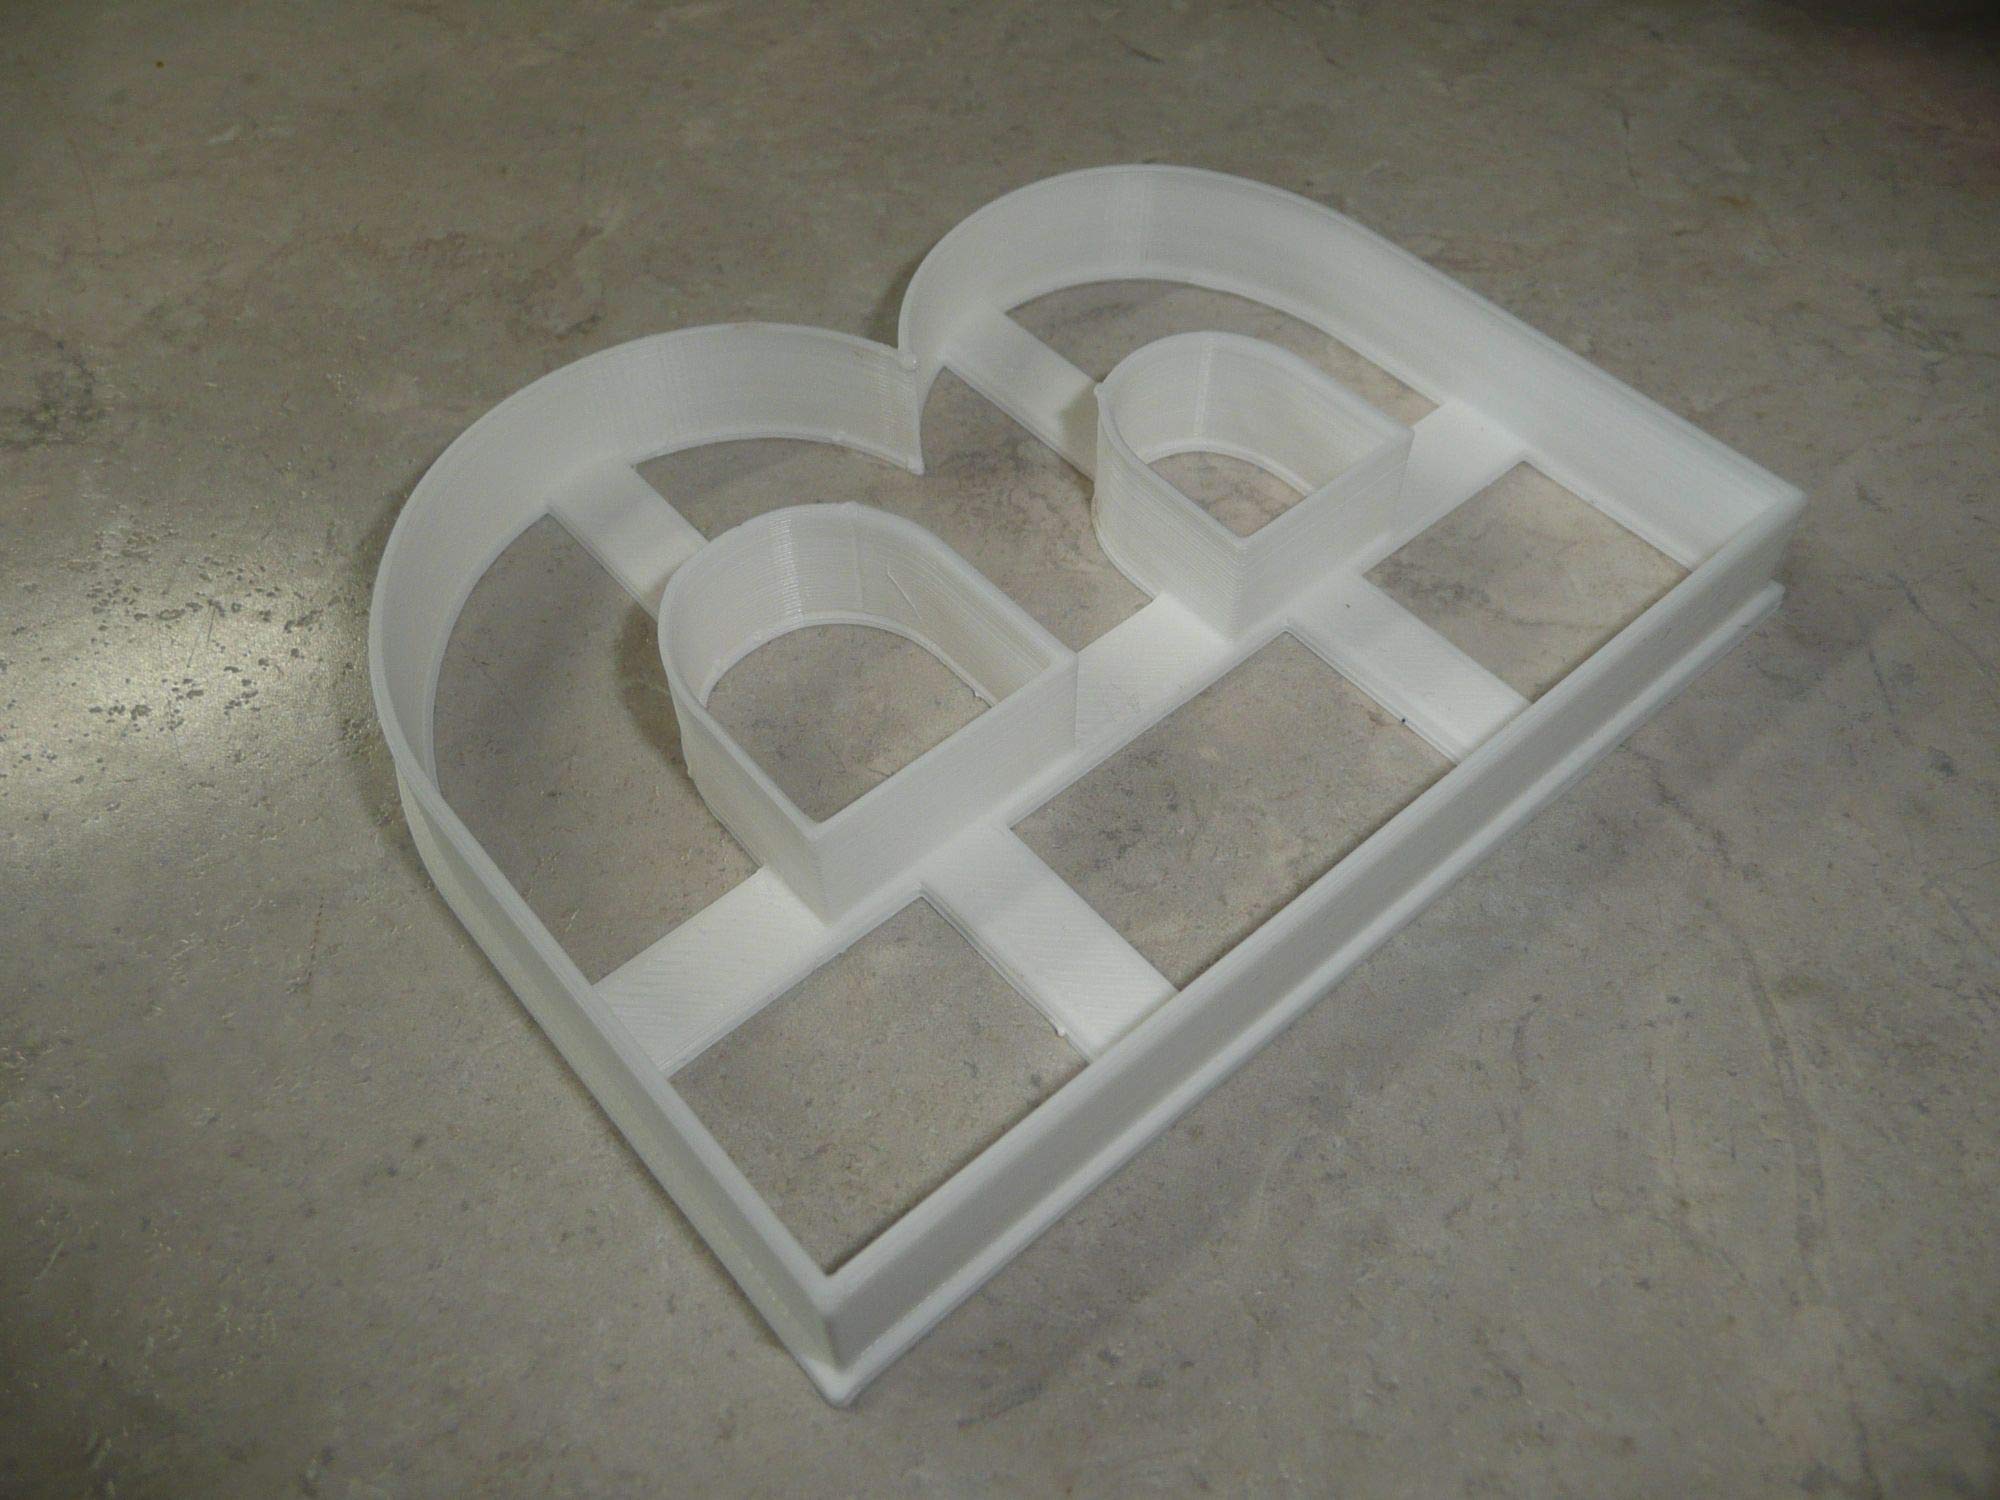 LETTER B 4 INCH UPPERCASE CAPITAL BLOCK FONT COOKIE CUTTER MADE IN USA PR4215